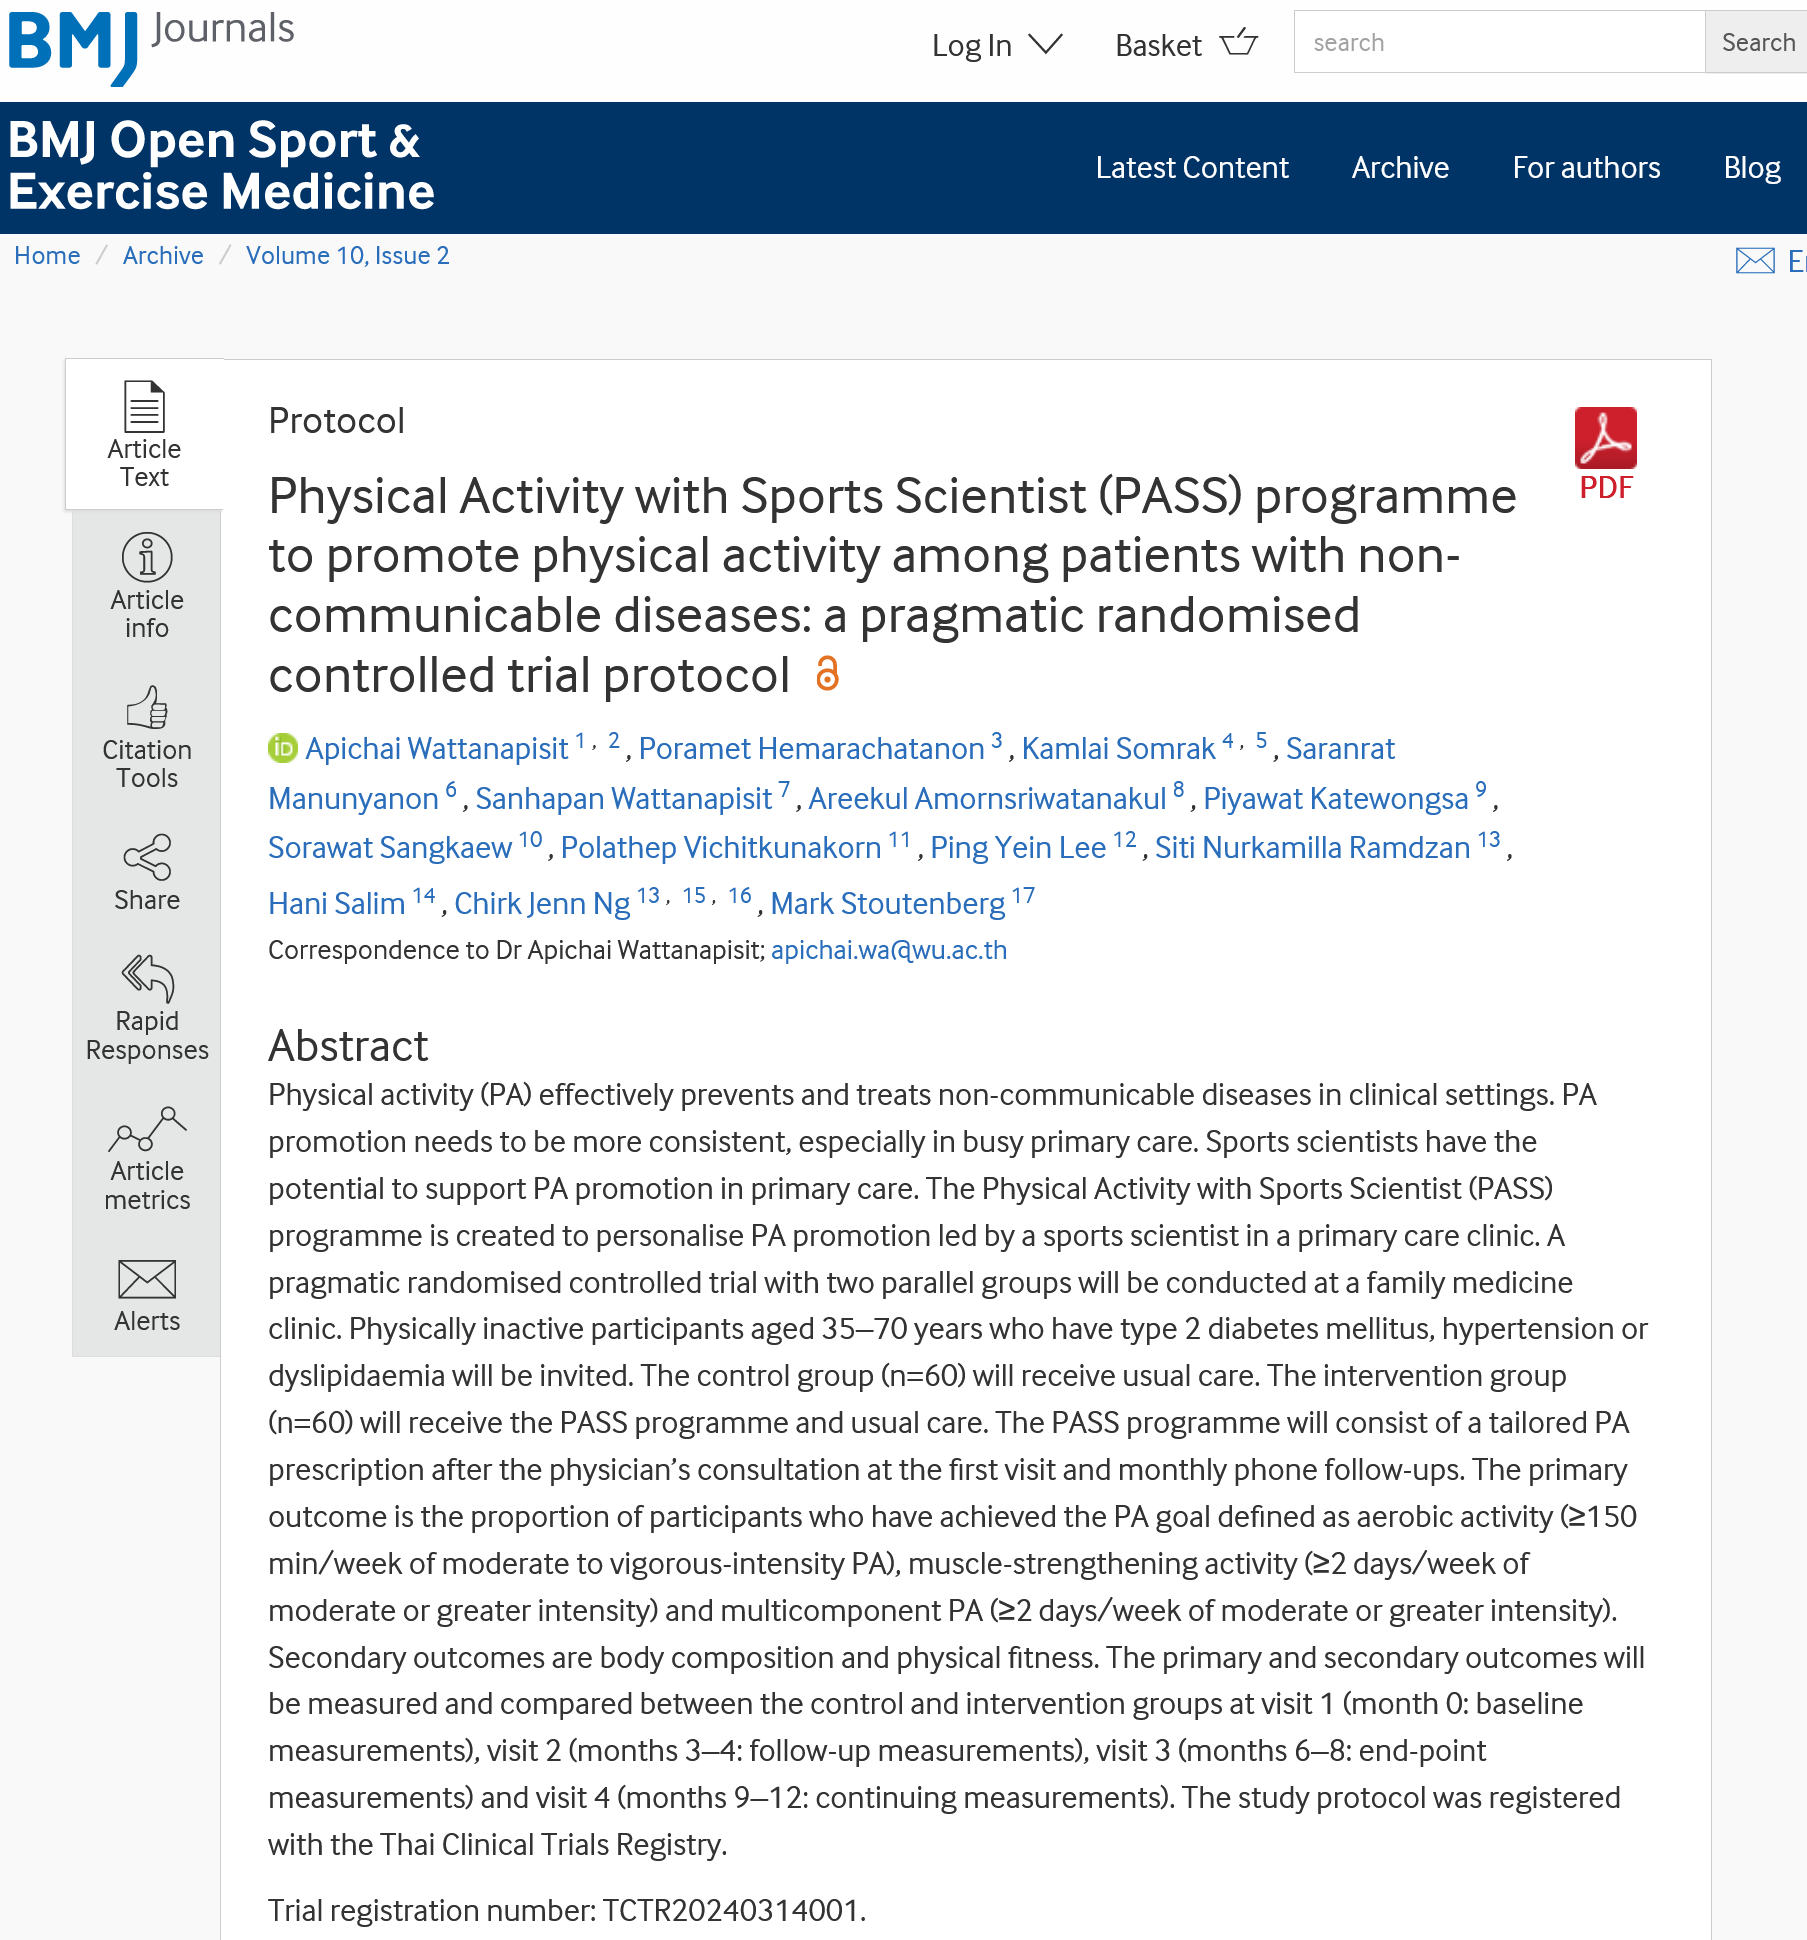 Physical Activity with Sports Scientist (PASS) programme to promote physical activity among patients with non-communicable diseases: a pragmatic randomised controlled trial protocol